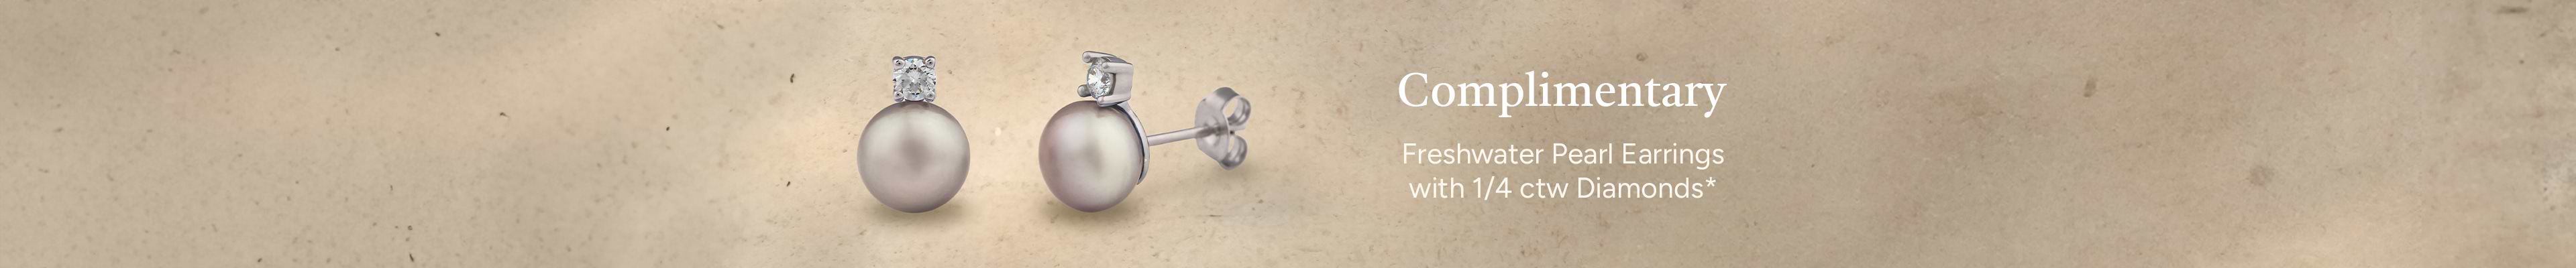 Complimentary Color Enhanced Gray Freshwater Pearl and Round Lab Grown Diamond Earrings with Purchase of CA$3,690 or More